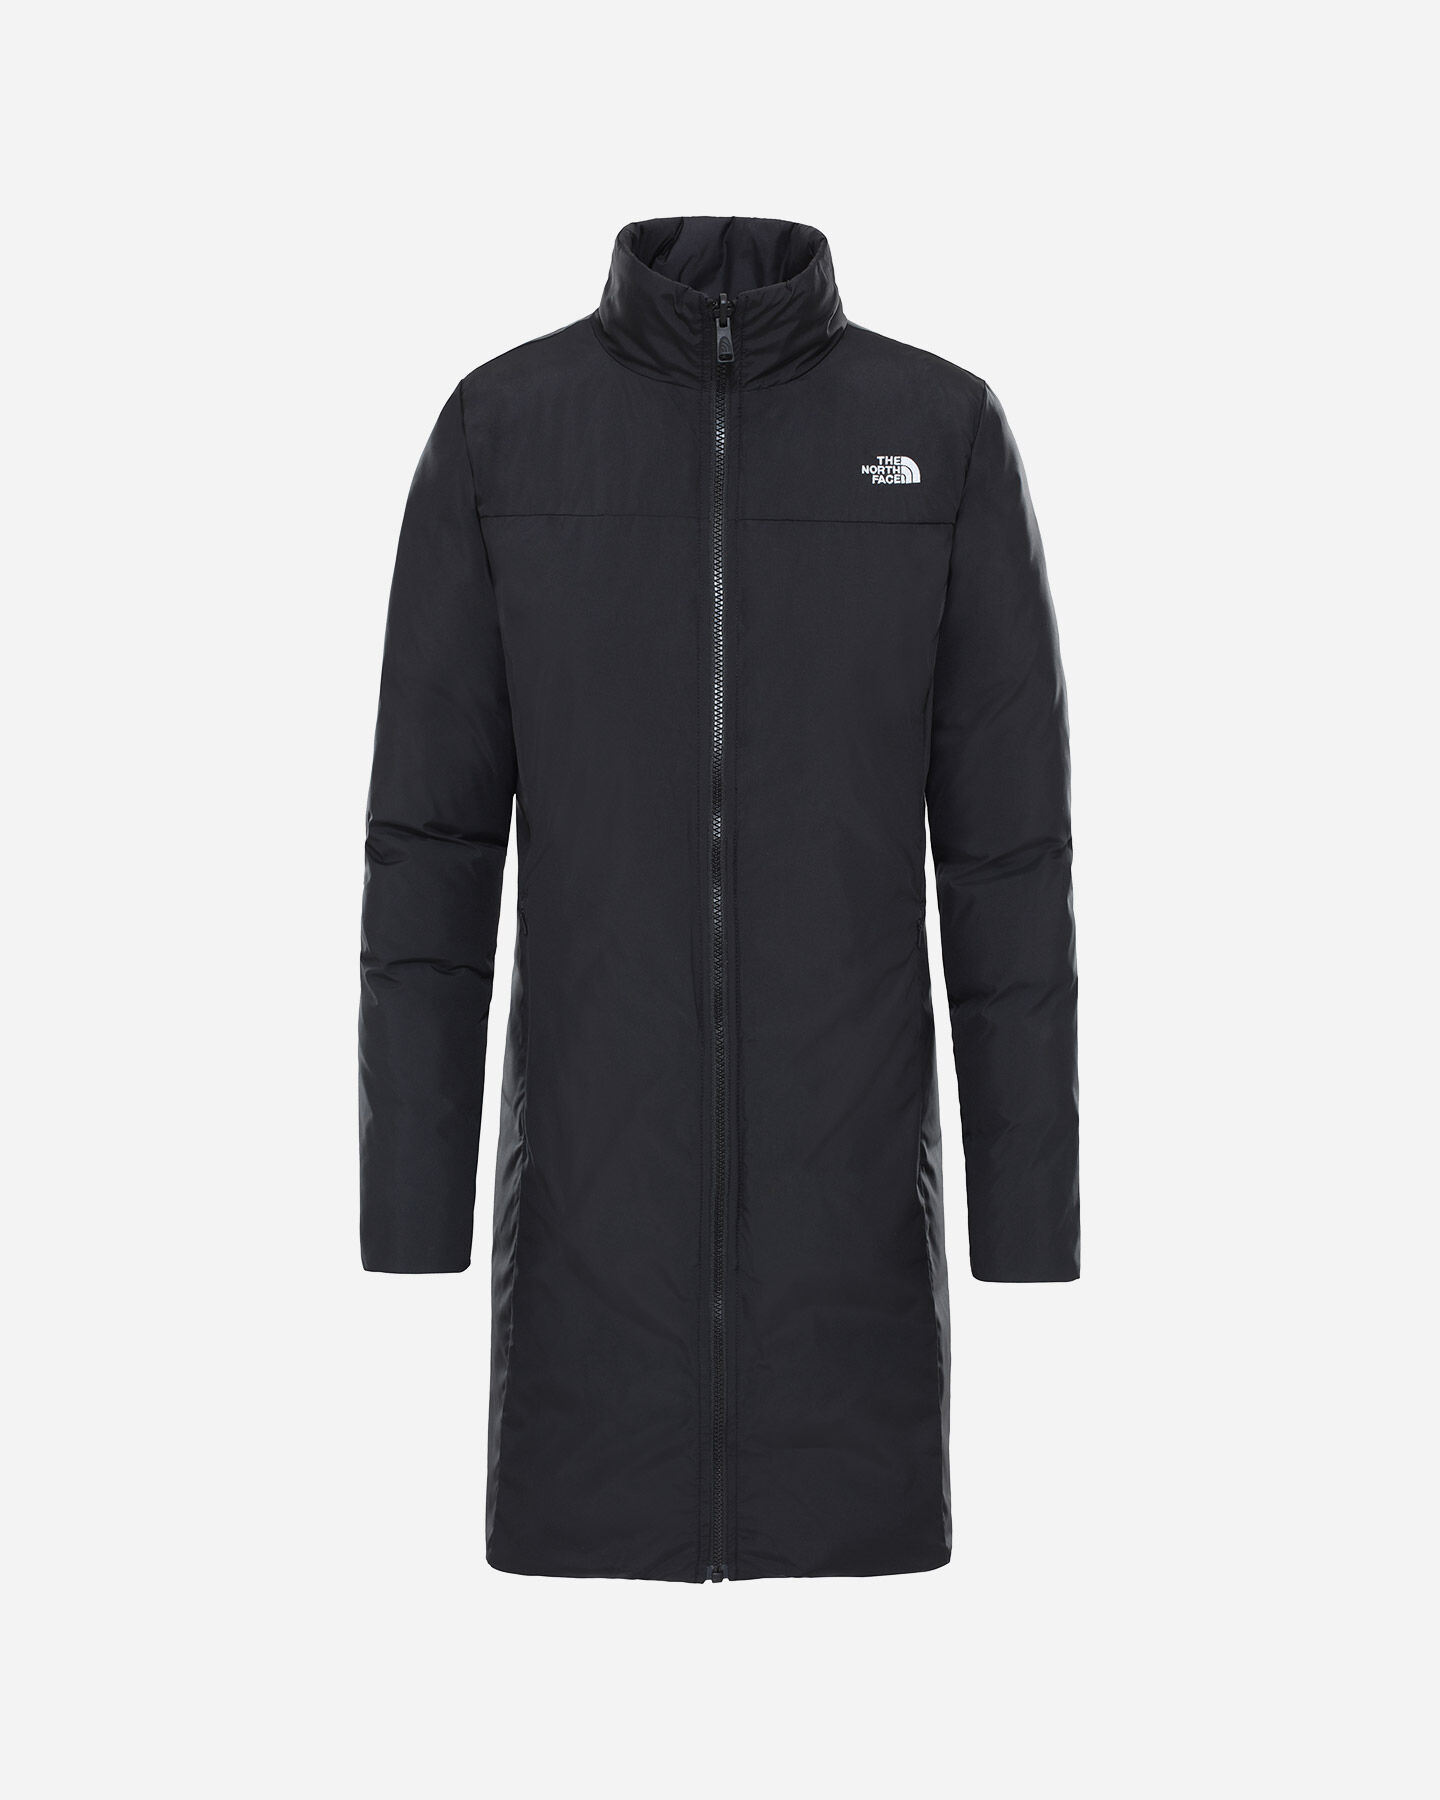  Giacca THE NORTH FACE SUZANNE TRICLIMATE W S5243553|KX7|S scatto 3